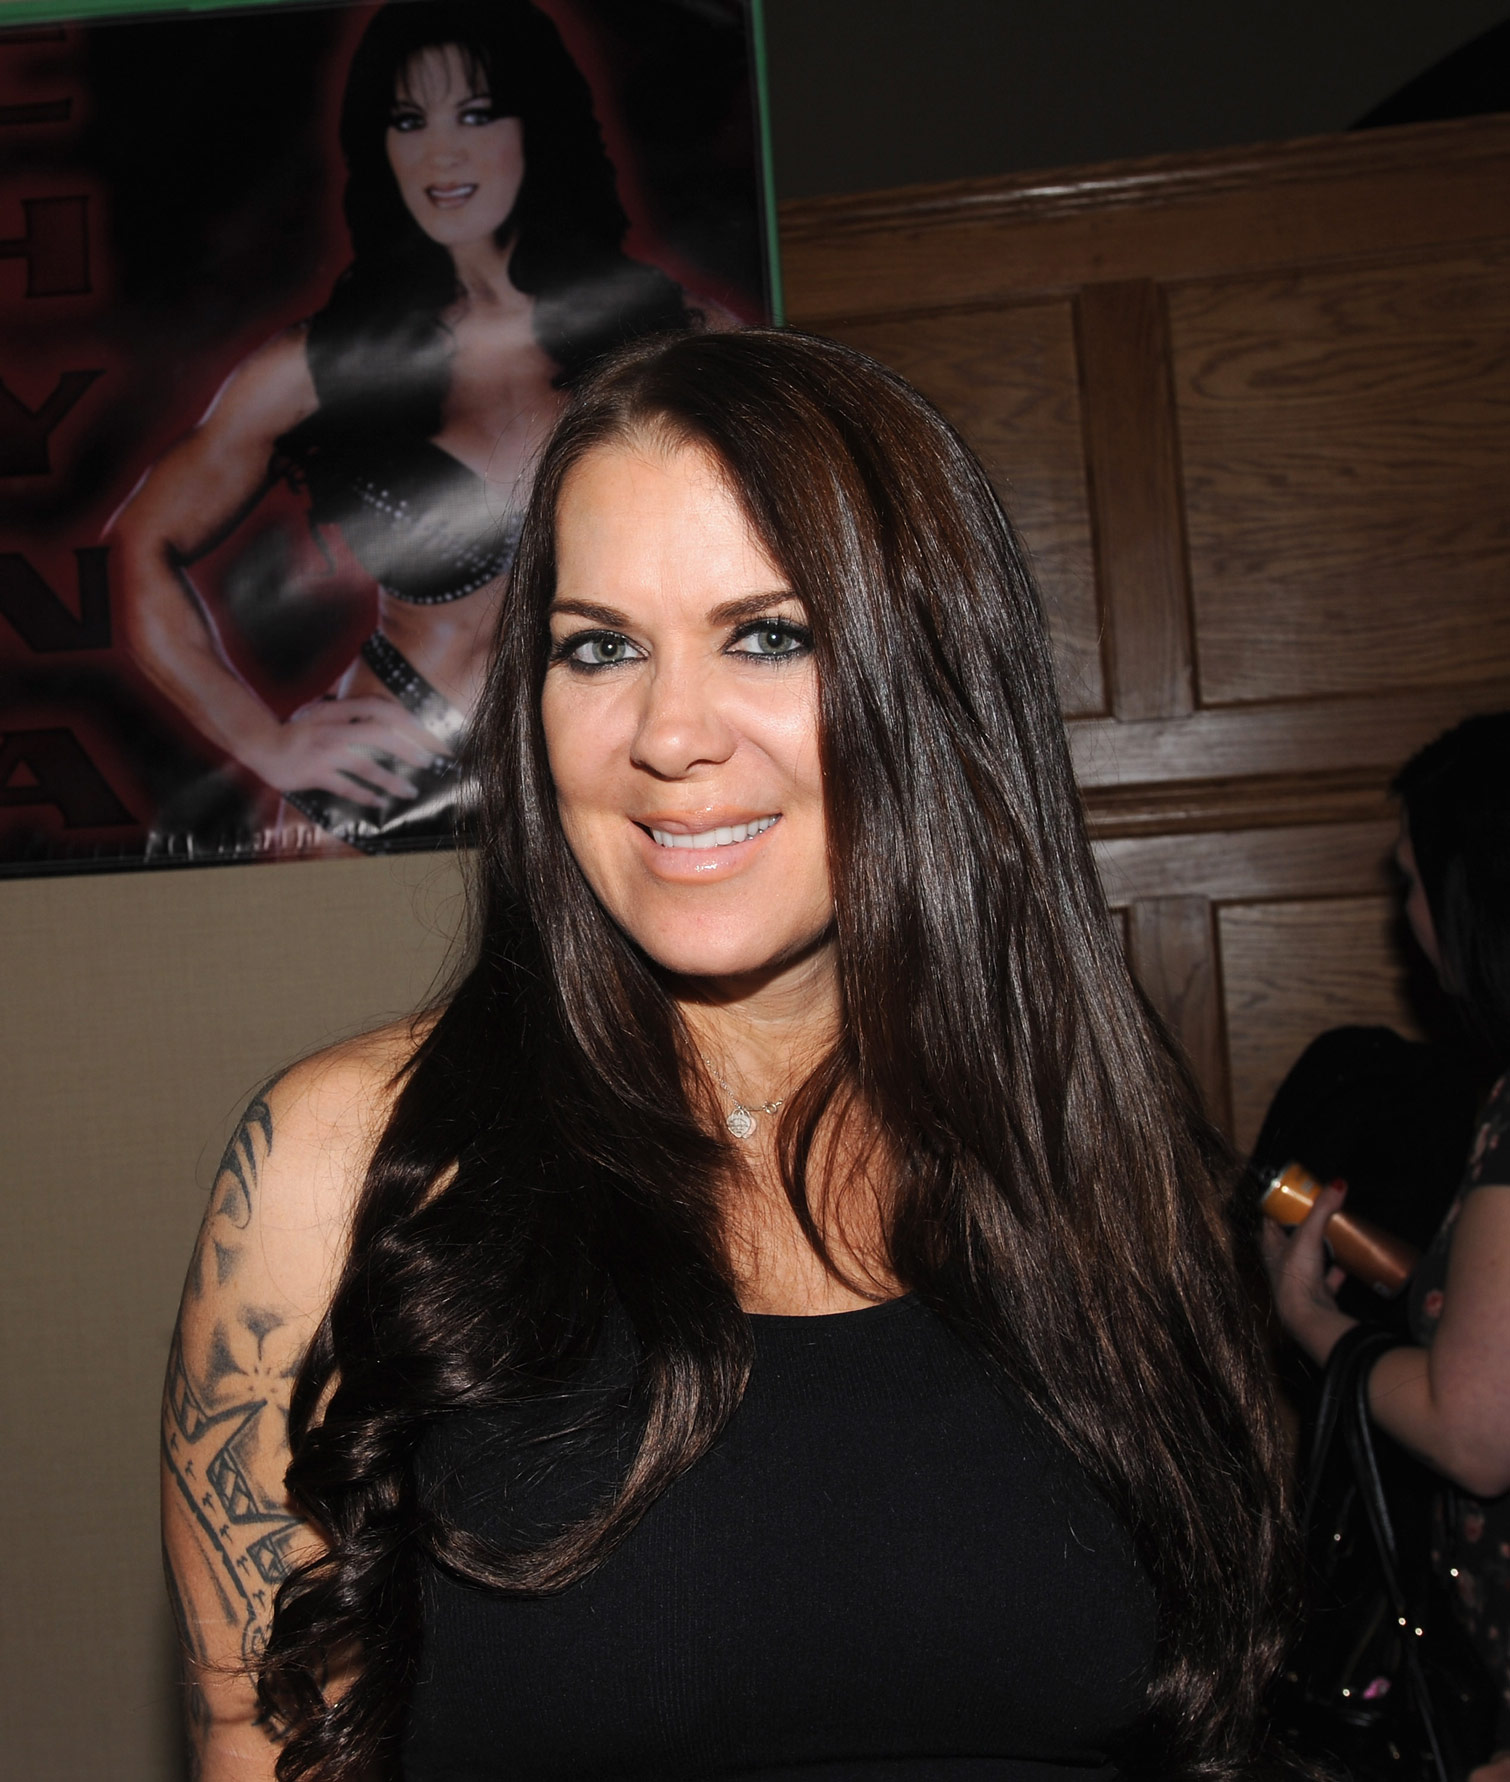 the great fall of chyna